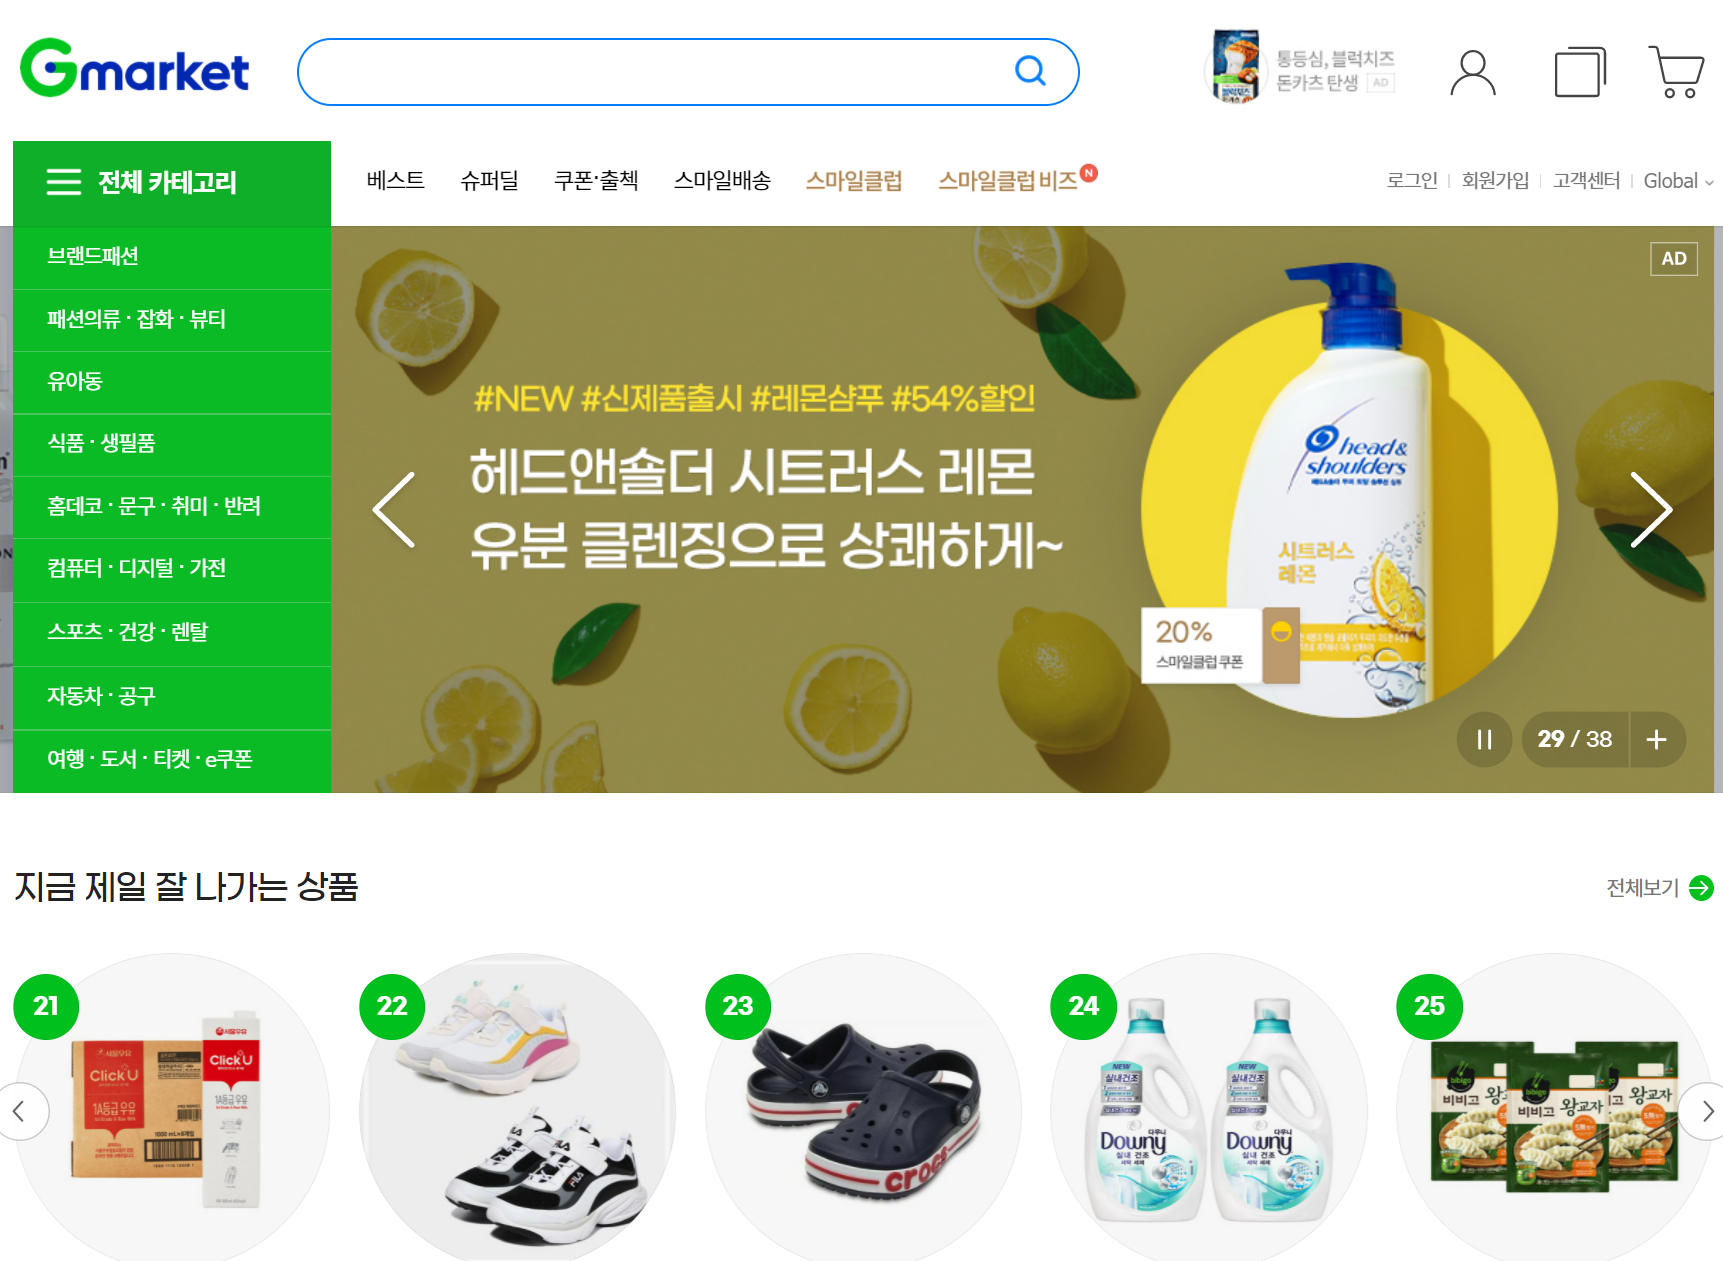 how to buy from gmarket